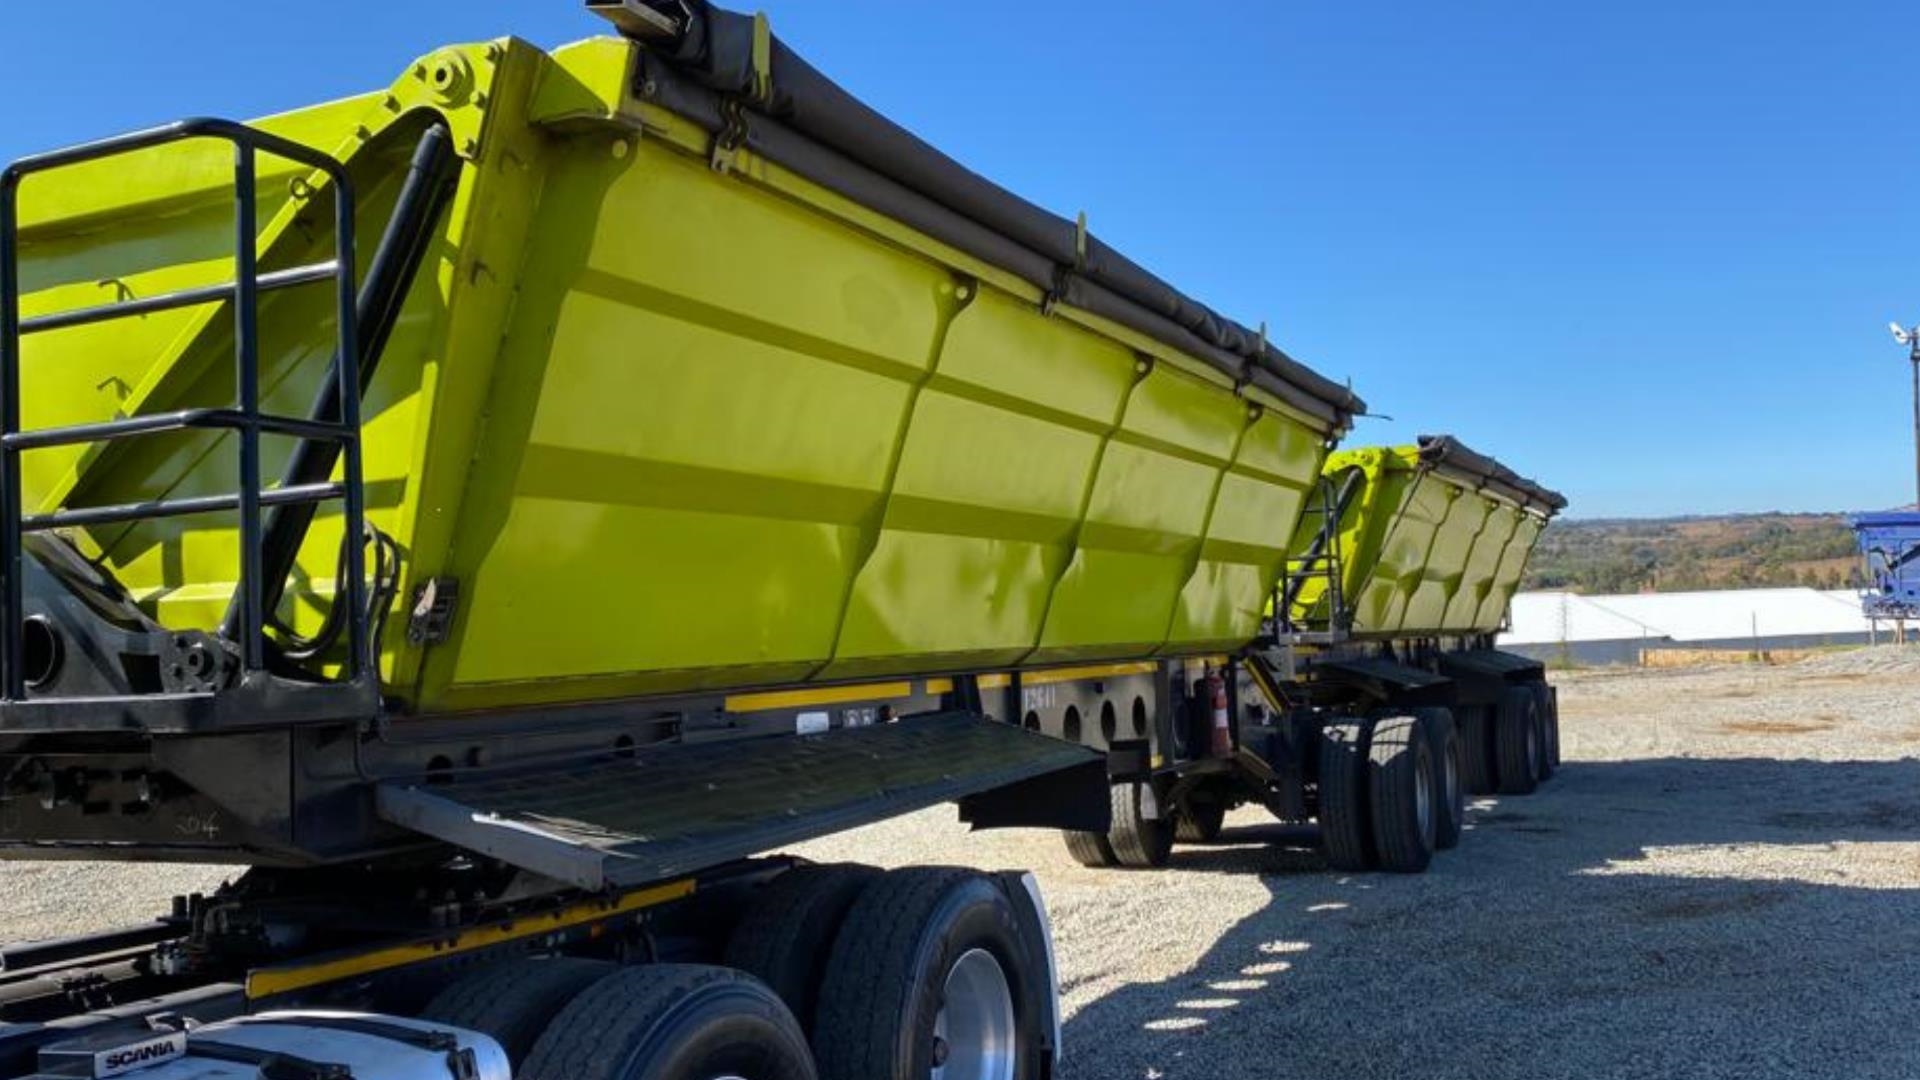 Afrit Trailers 2014 Afrit 40m3 Side Tipper Trailer 2014 for sale by Truck and Plant Connection | Truck & Trailer Marketplaces